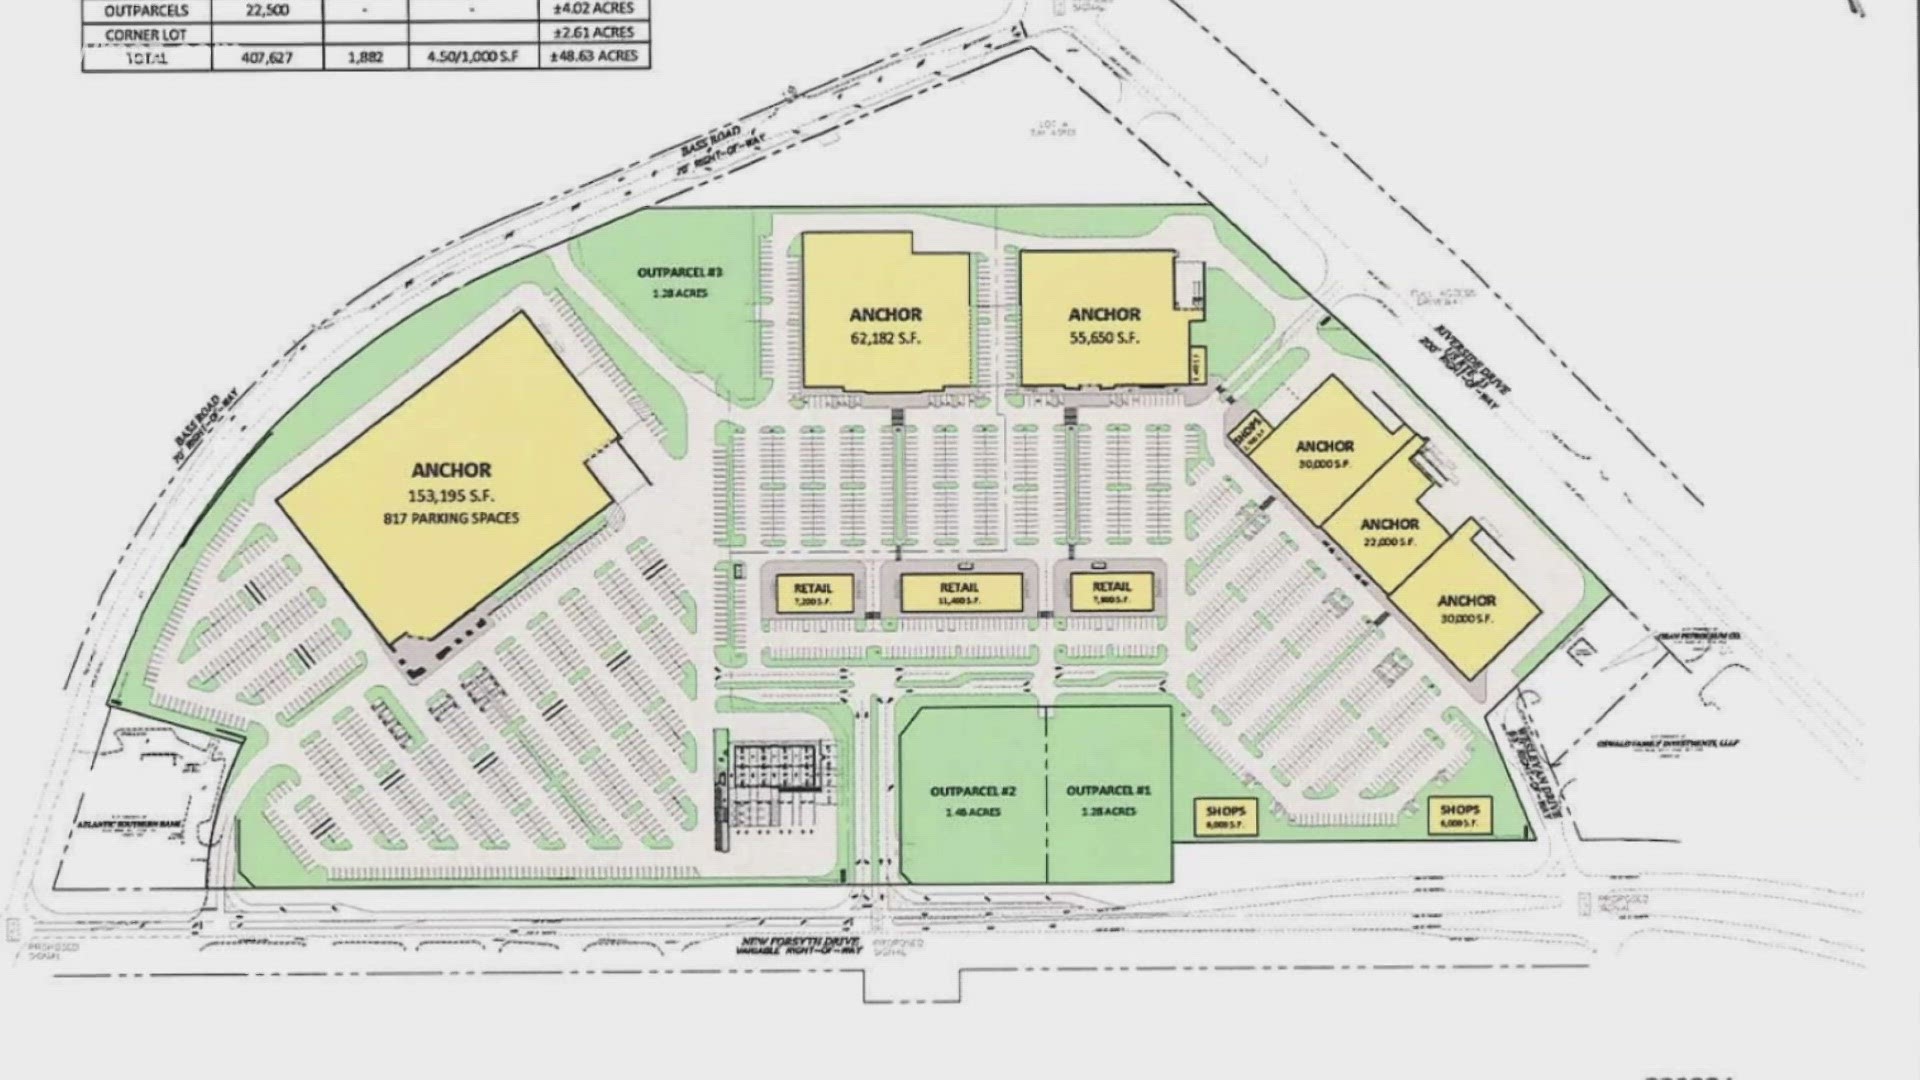 The shopping center would feature a more than 150,000 square foot wholesale club, restaurants, office buildings and other shops.